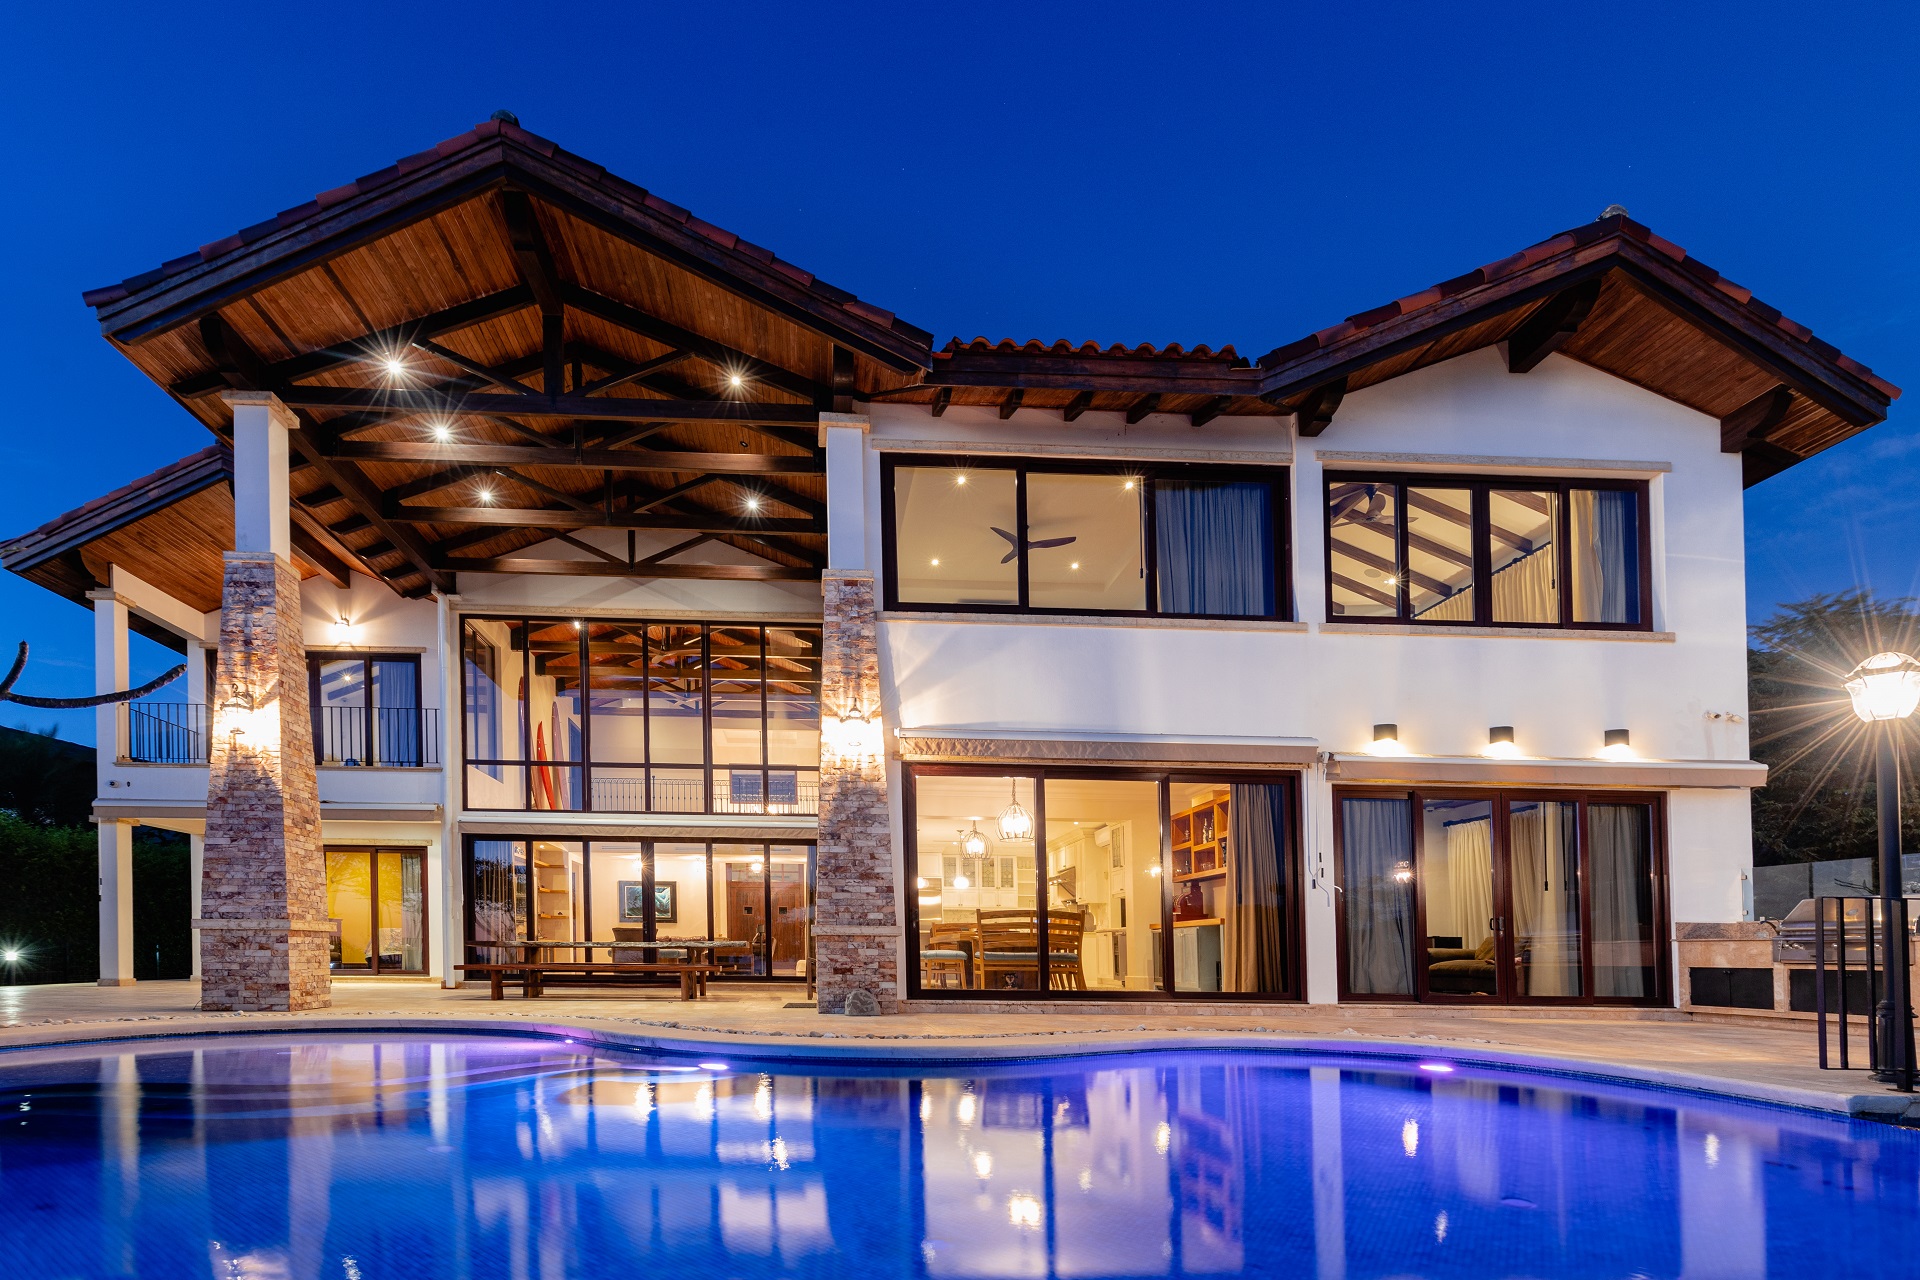 La Vida Mar, a Private Oceanfront Estate in Costa Rica’s Surf Capital, Offered at US$16,000,000